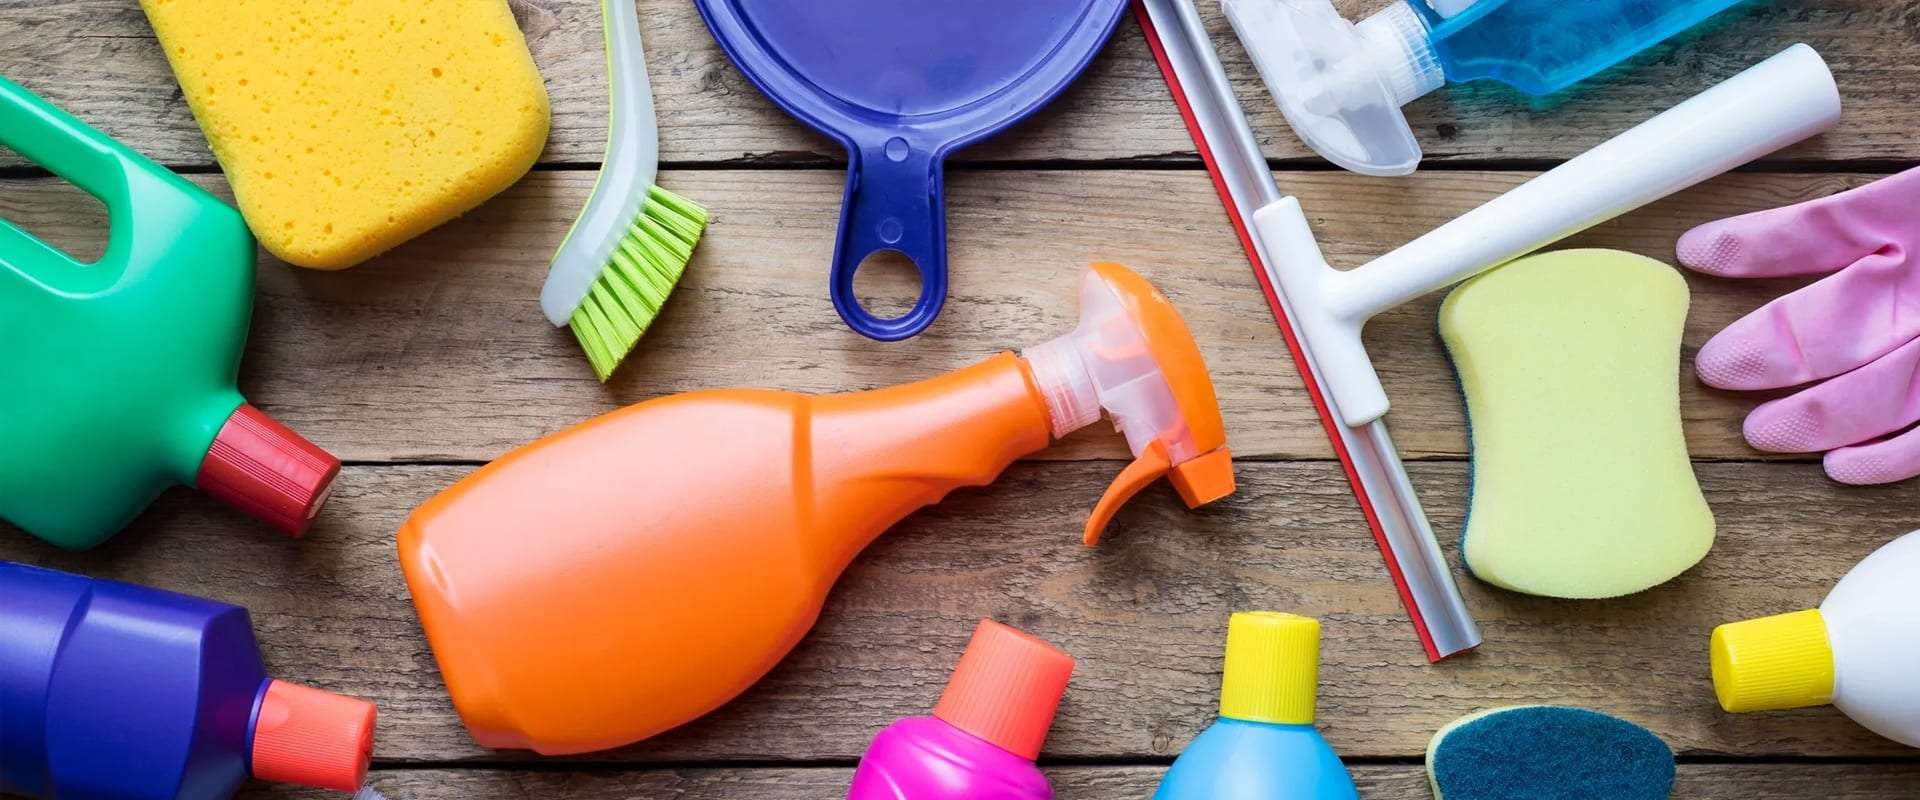 Cleaners-Cleaning Items